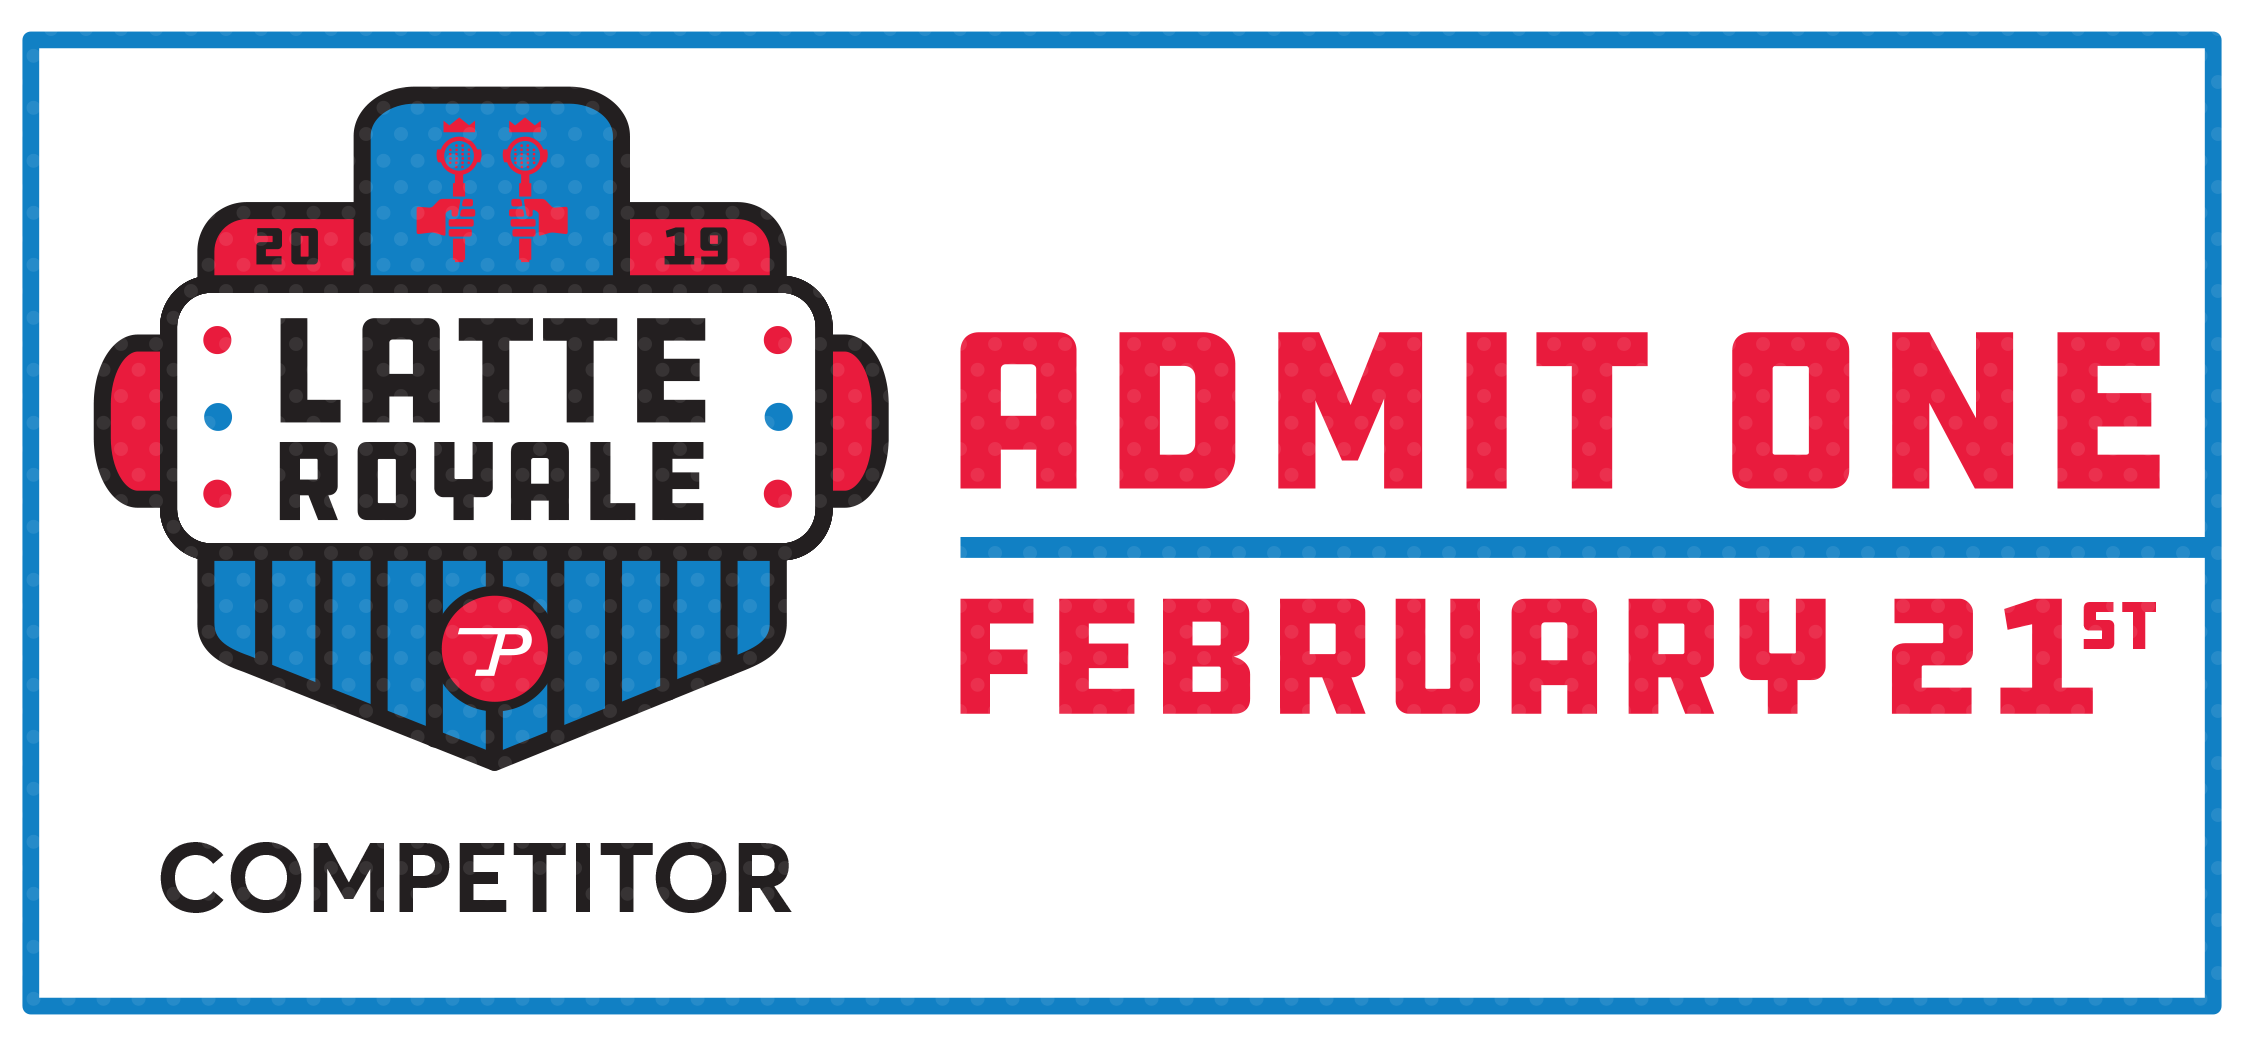 Latte Royale 2019 Competitor Ticket - Graphic Design (2244x1046), Png Download